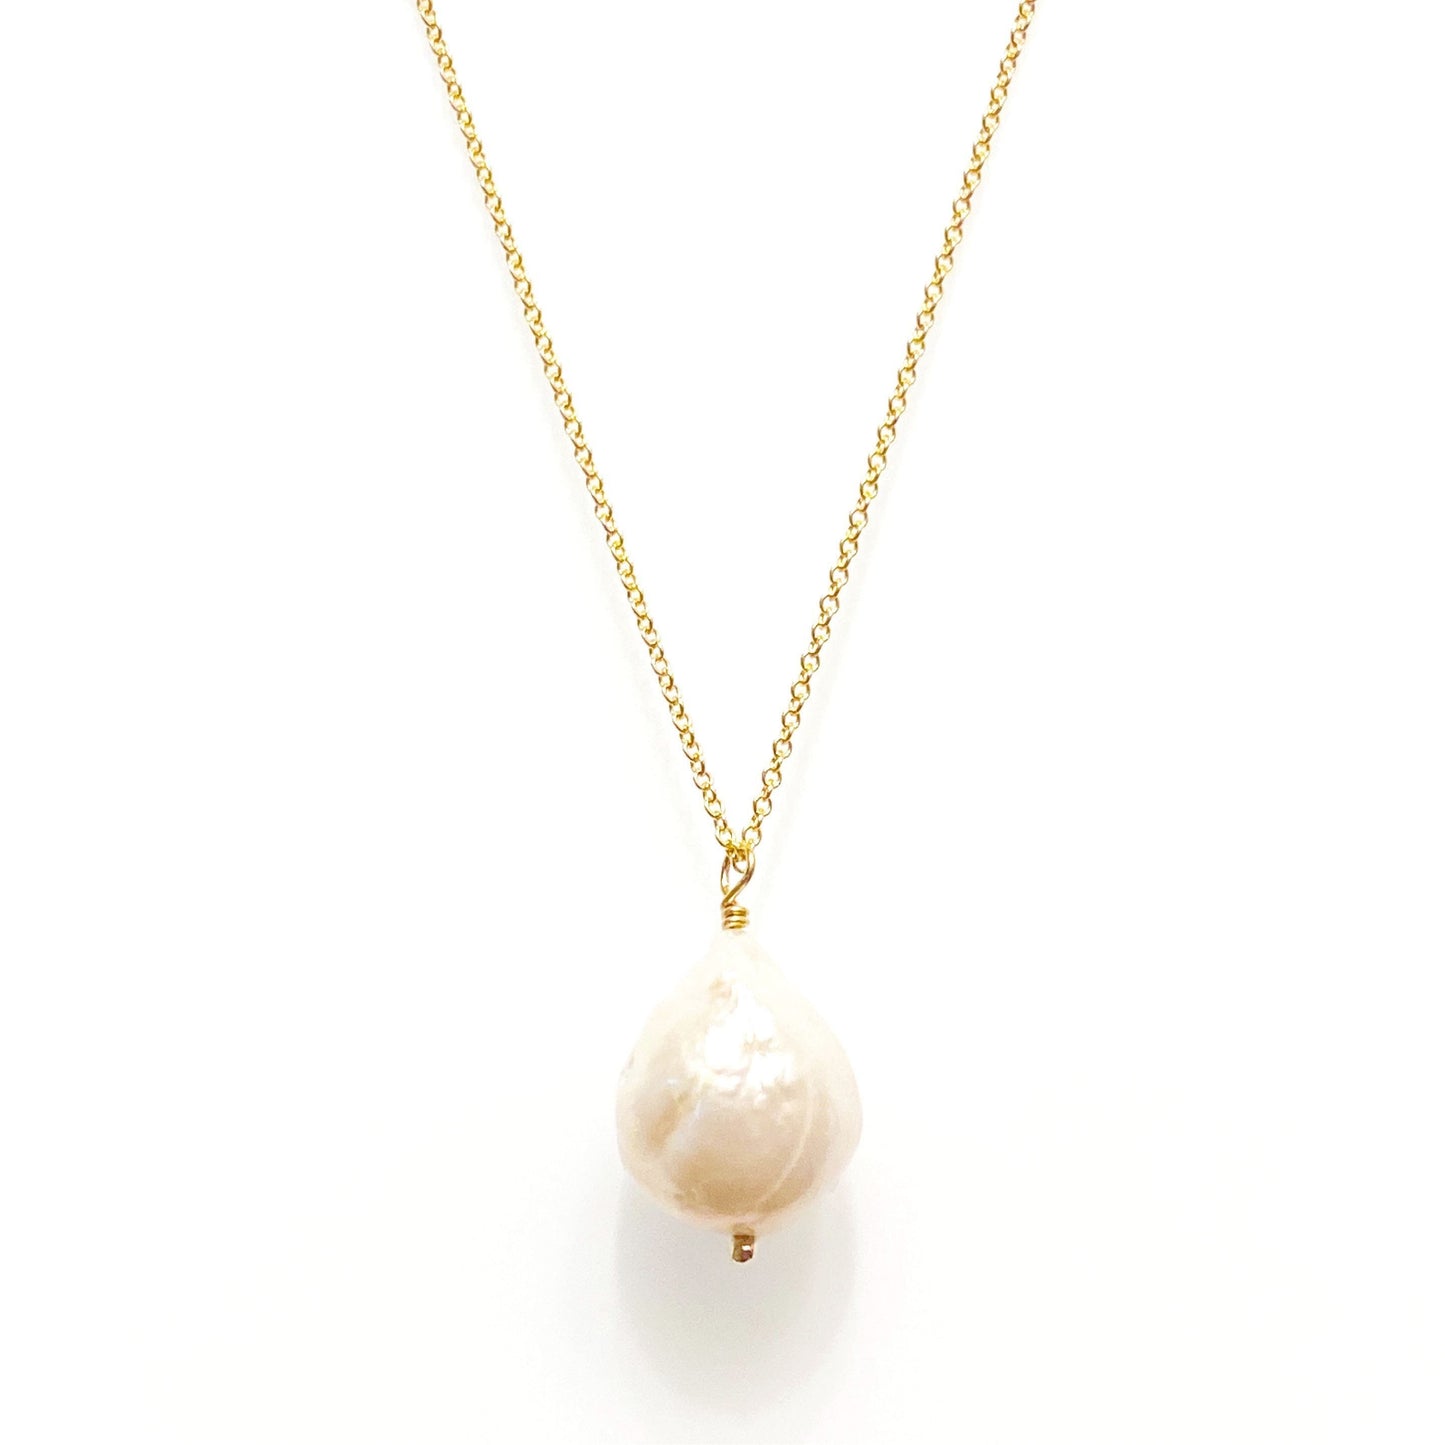 Freshwater baroque pearl necklace (14K gold-filled)